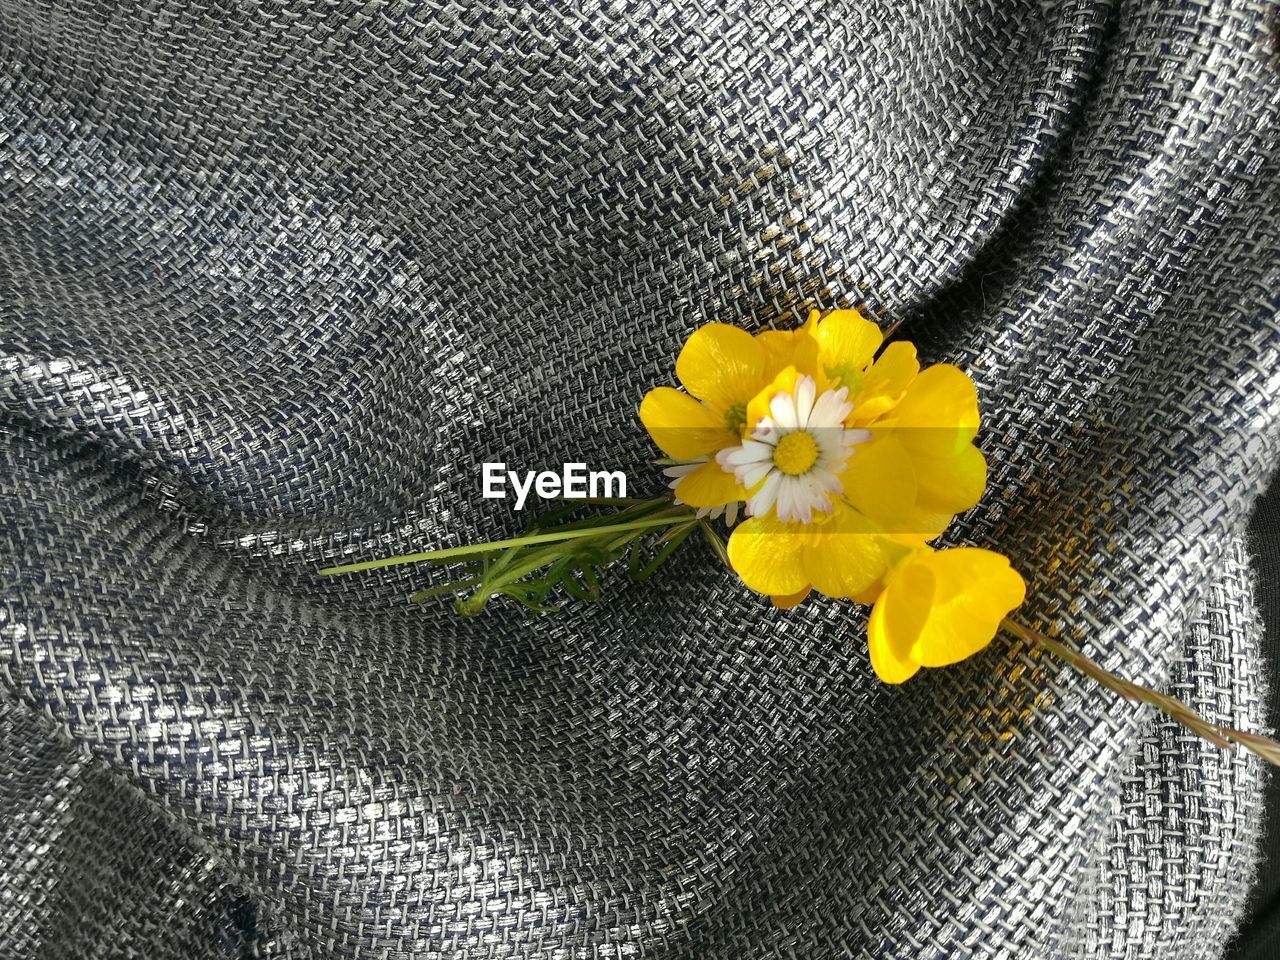 High angle view of yellow flowers on fabric